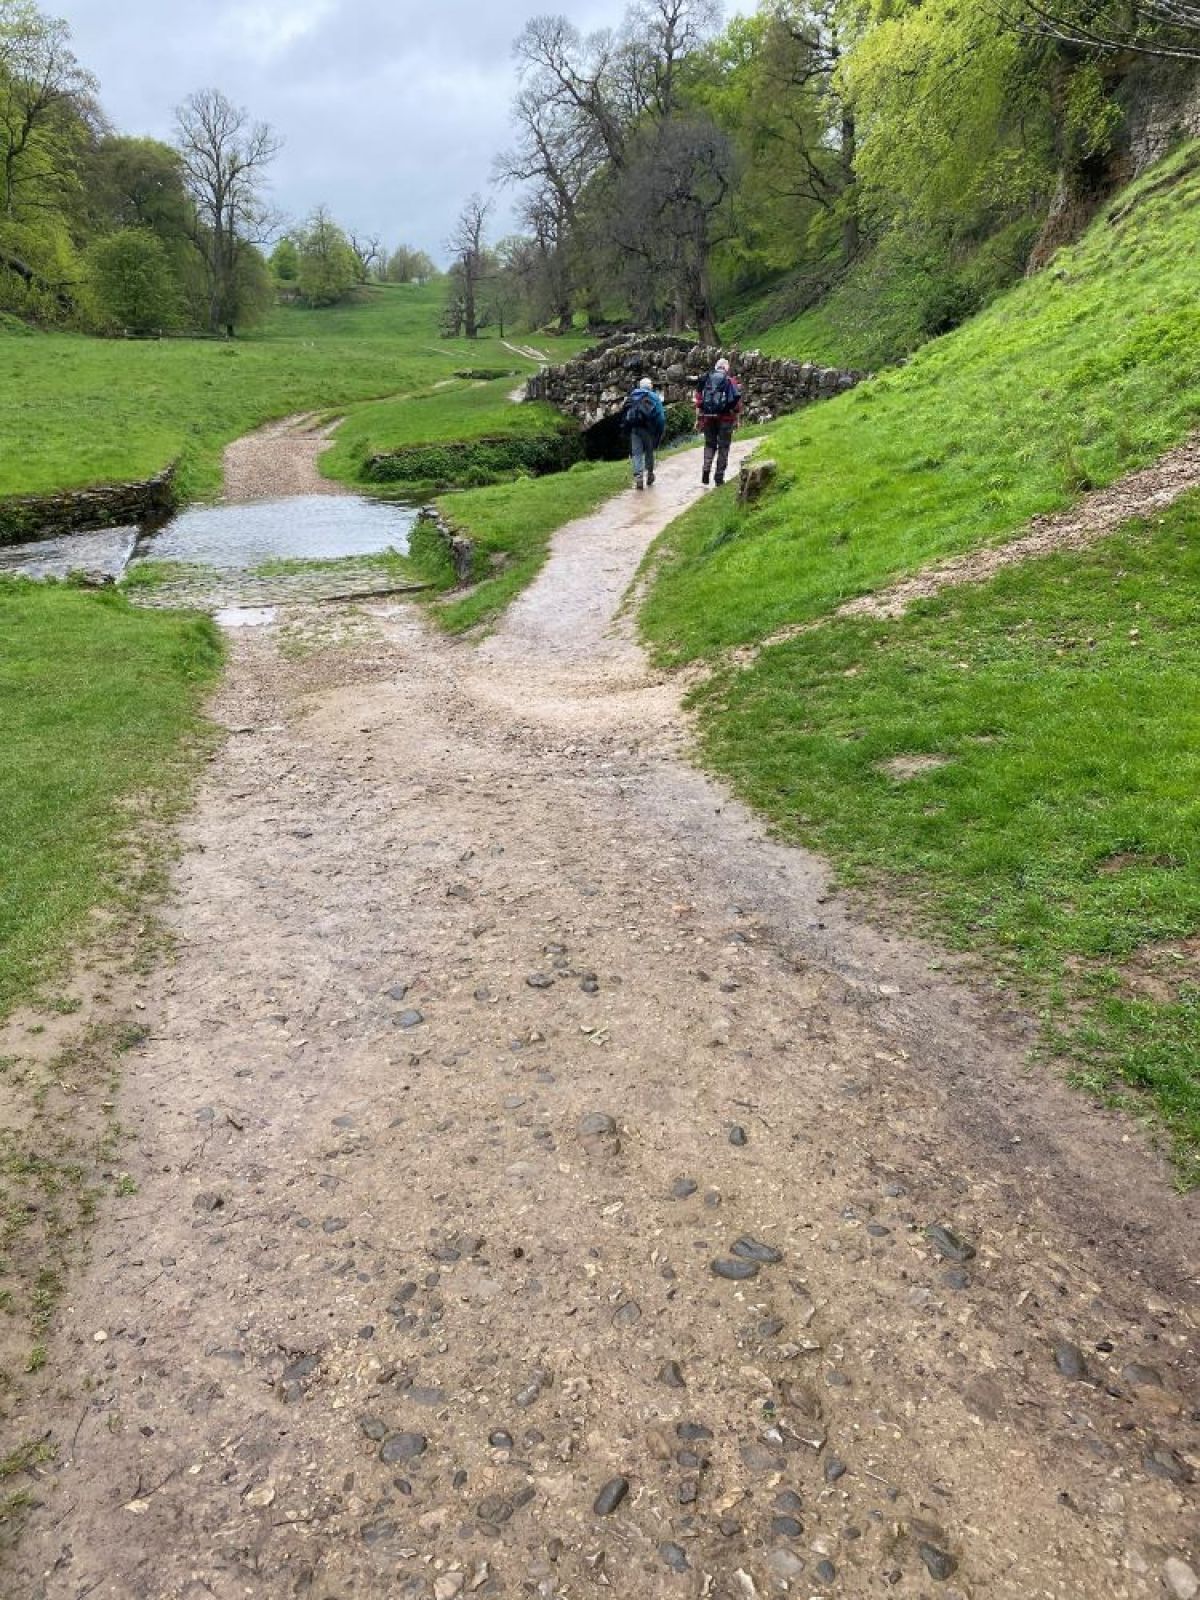 ------Sponsored Walk from Ripon Cathedral to Bradford Cathedral------ Raises £2,100 - A Muddy Path on day one